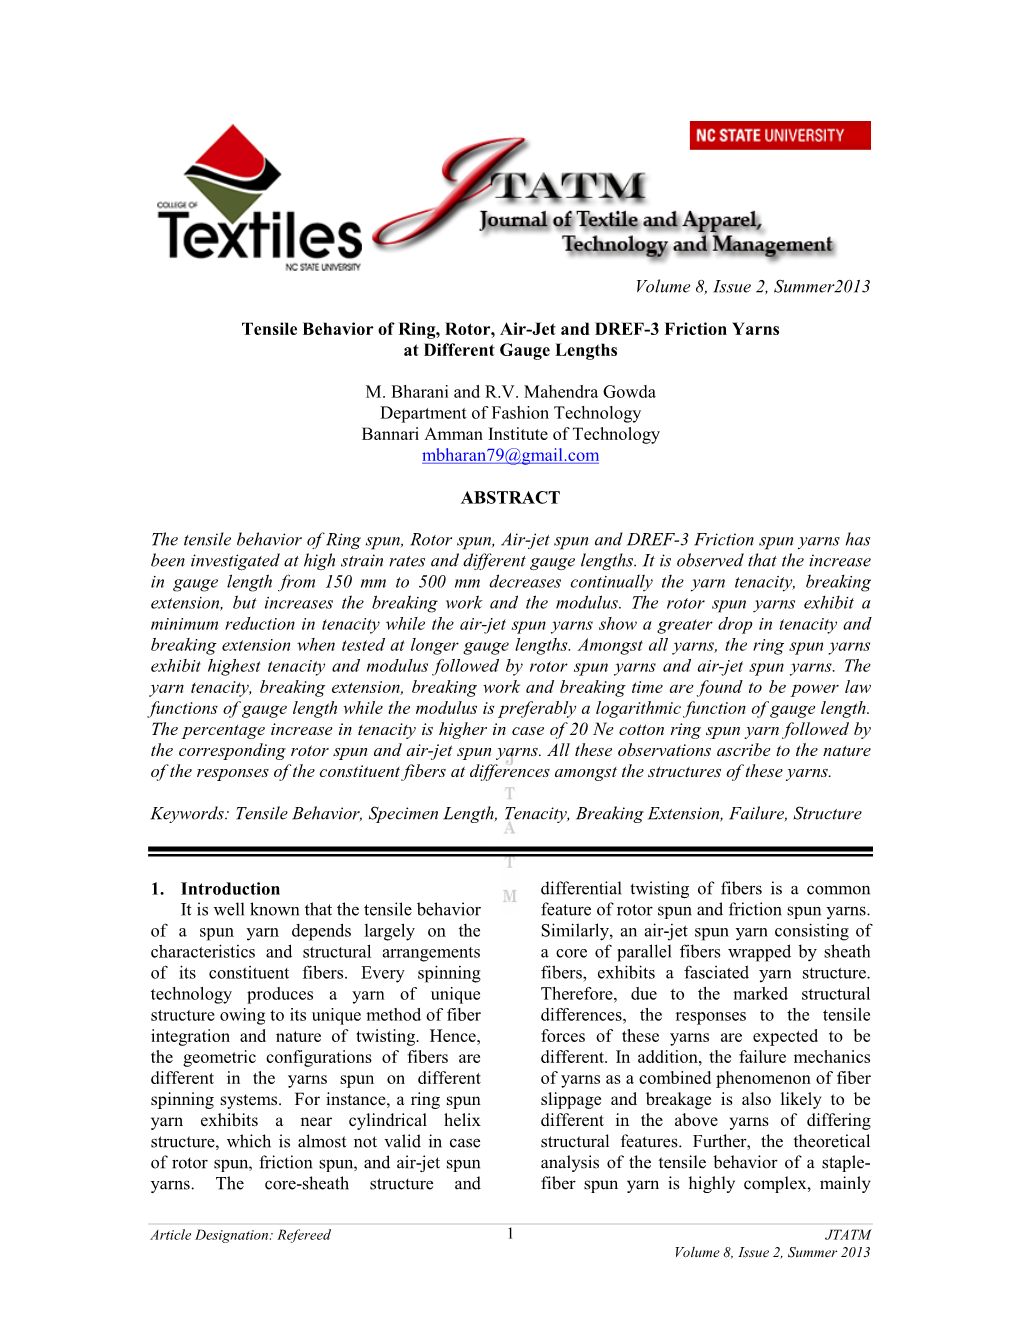 Tensile Behavior of Ring, Rotor, Air-Jet and DREF-3 Friction Yarns at Different Gauge Lengths